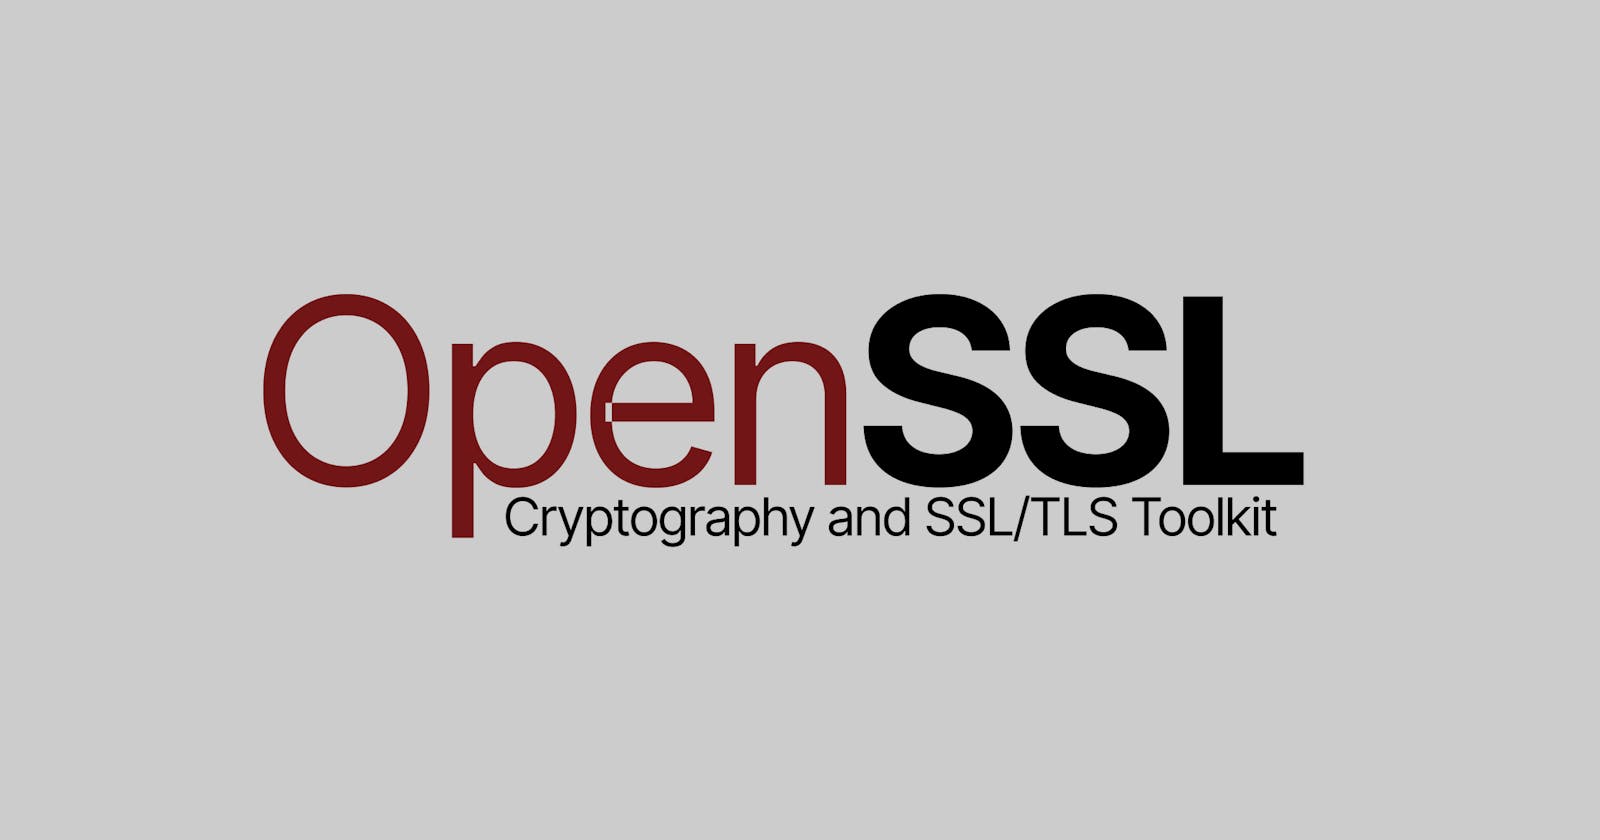 Creating self-signed certificates using OpenSSL